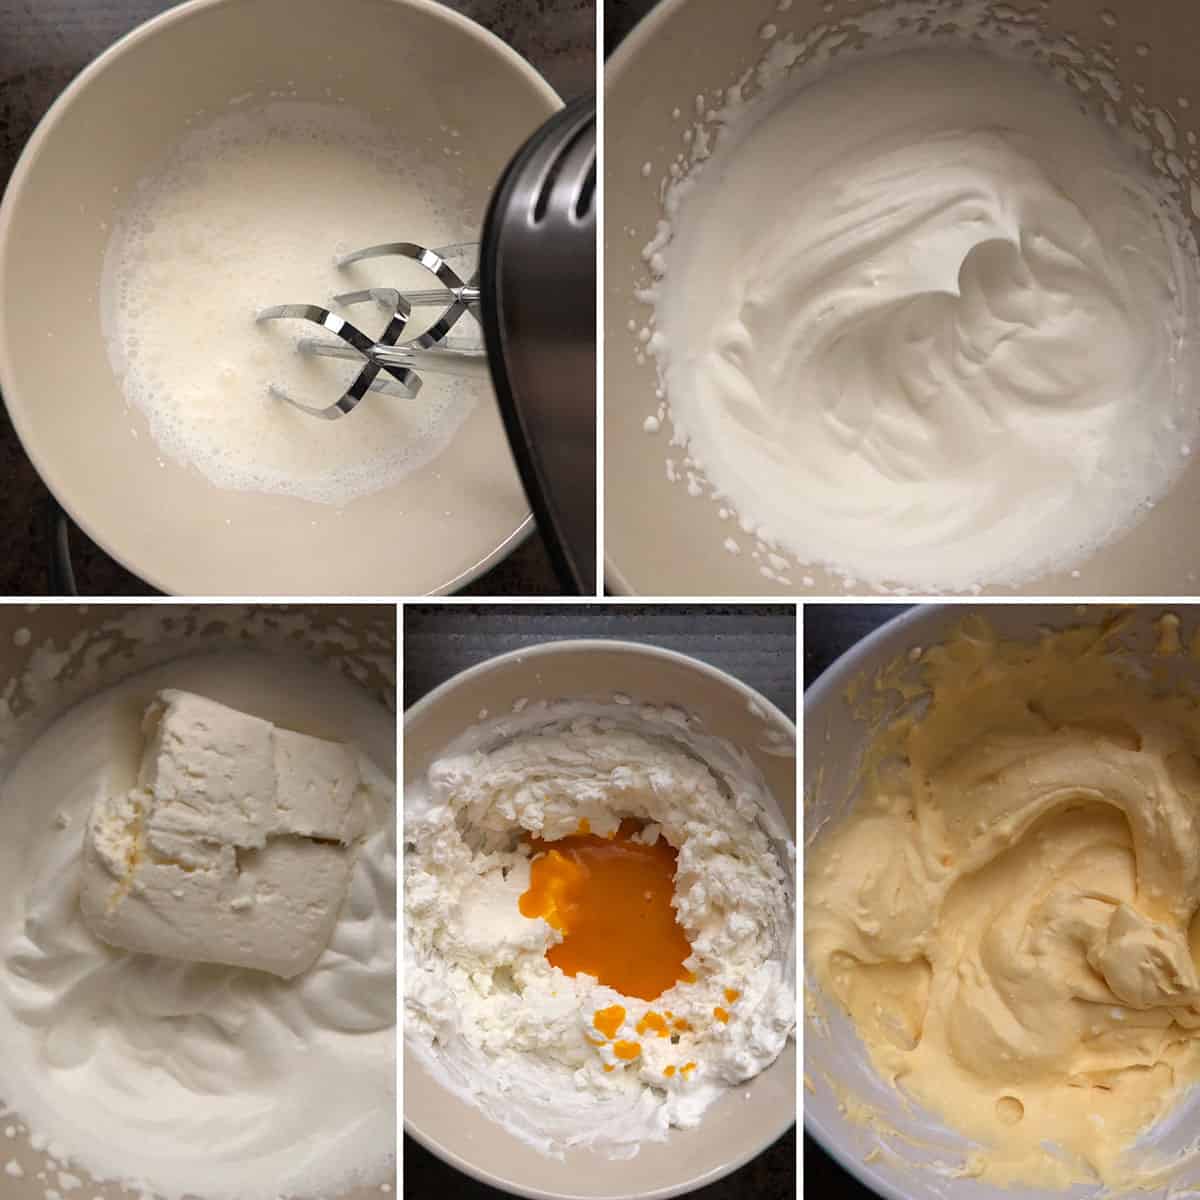 Step by step photos showing the making of mango frosting